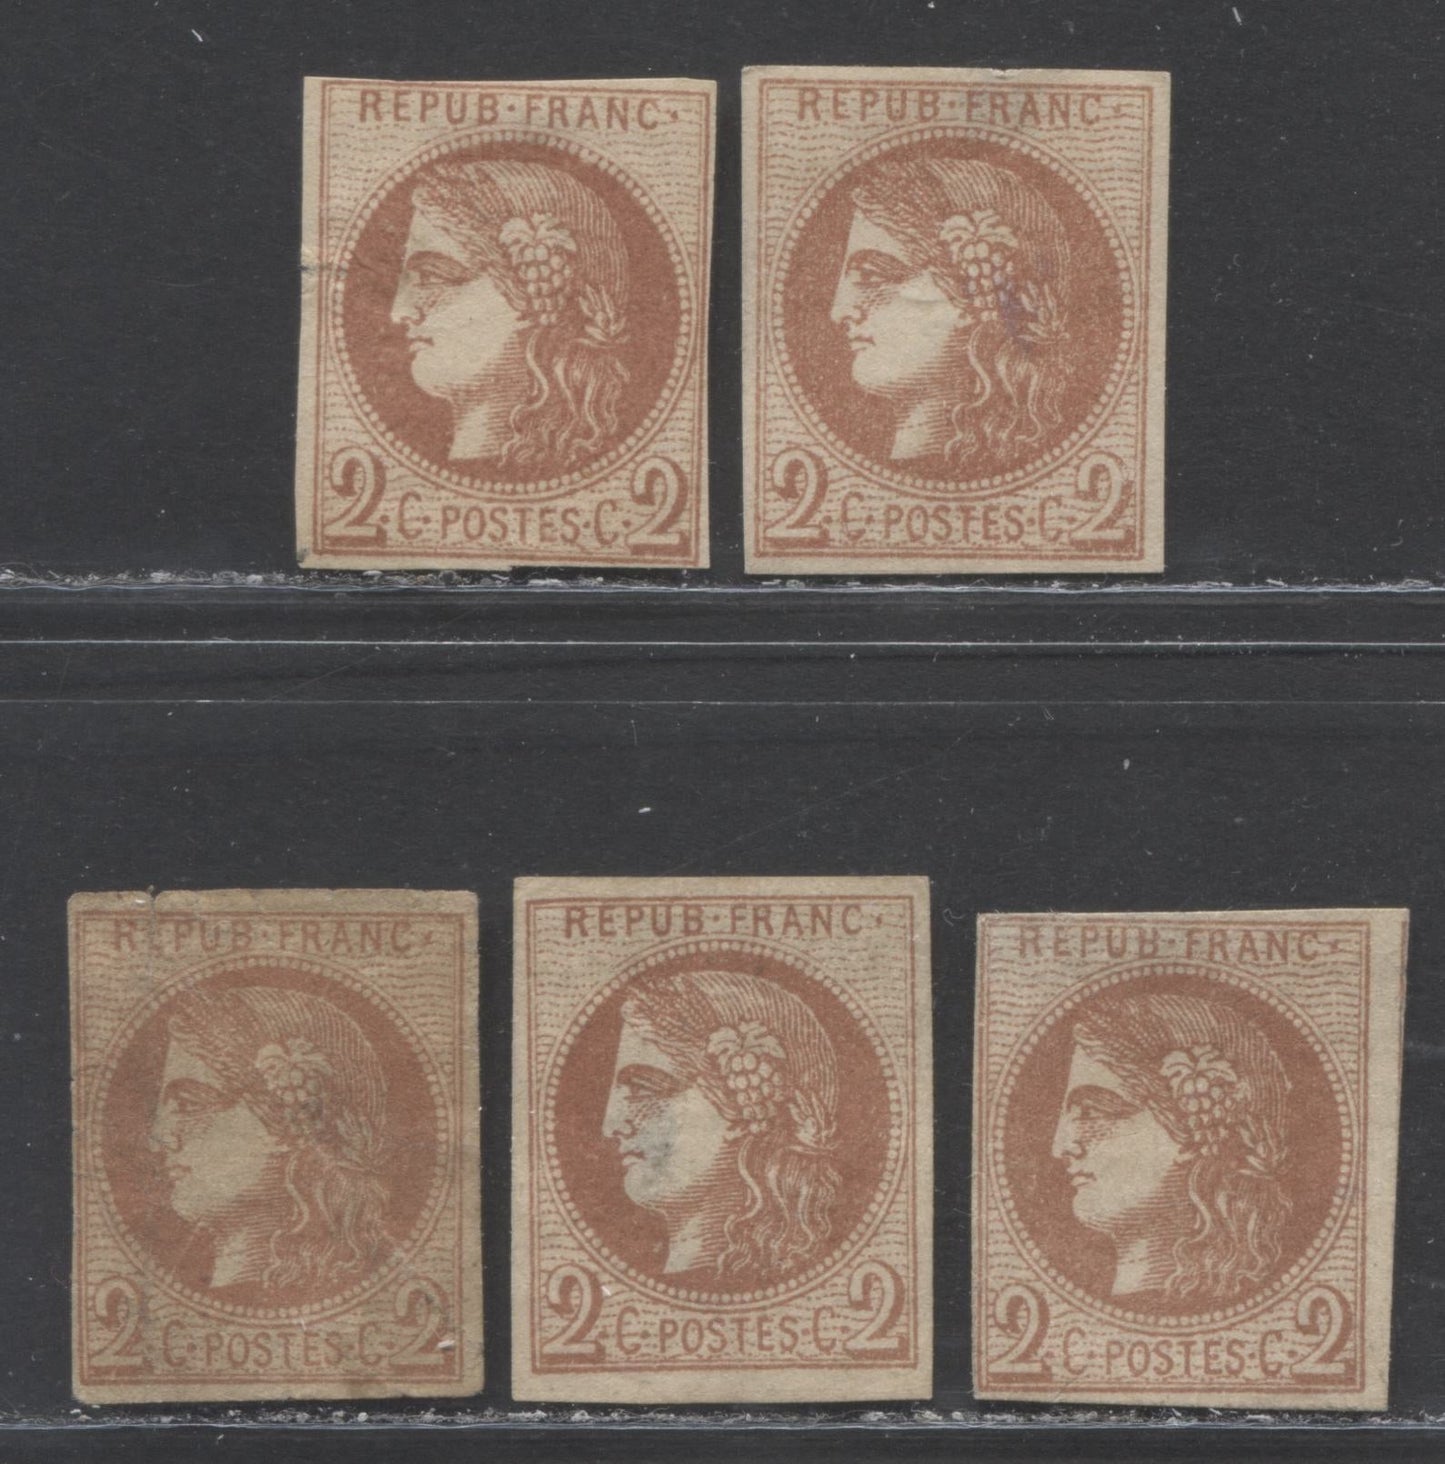 Lot 331 France SC#39 2c Red Brown 1870-1871 Imperf Bordeaux Definitive Issue, A Ungraded Shade Study Lot, 2022 Scott Classic Cat. $550 USD, Net Est. $30, Click on Listing to See ALL Pictures